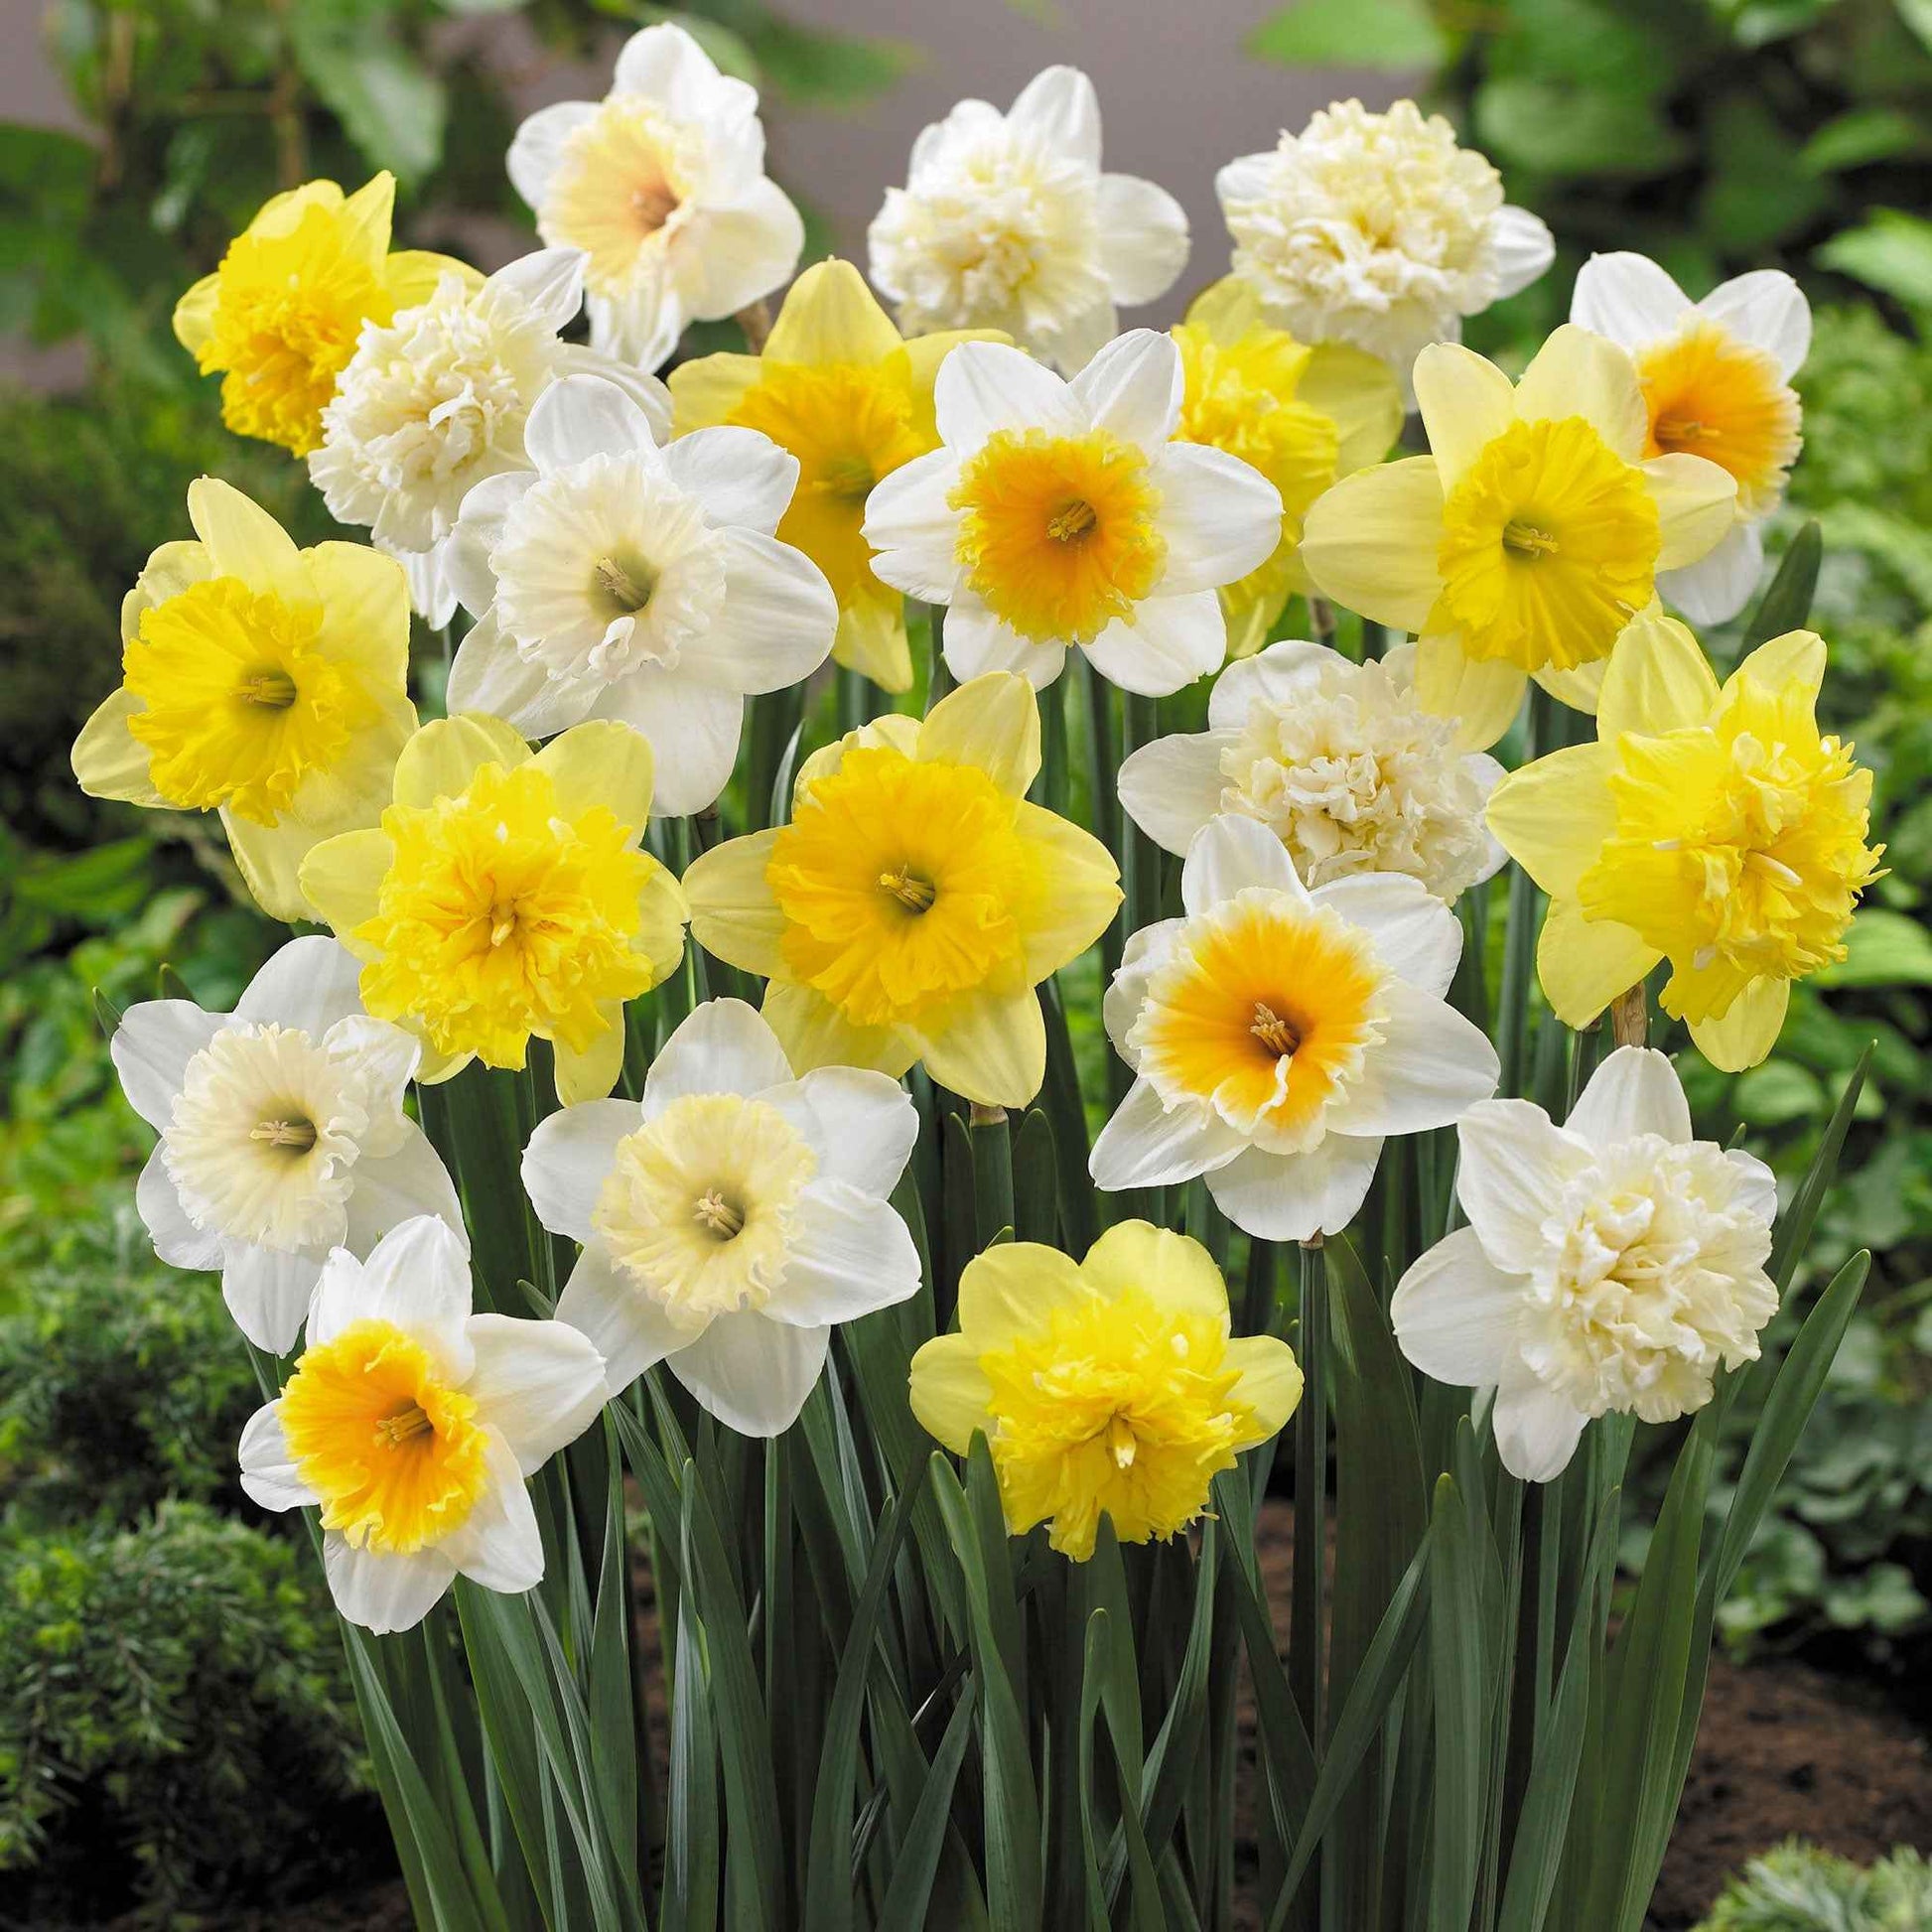 20x Narcis Narcissus - Mix 'Hello Spring!' - Alle populaire bloembollen